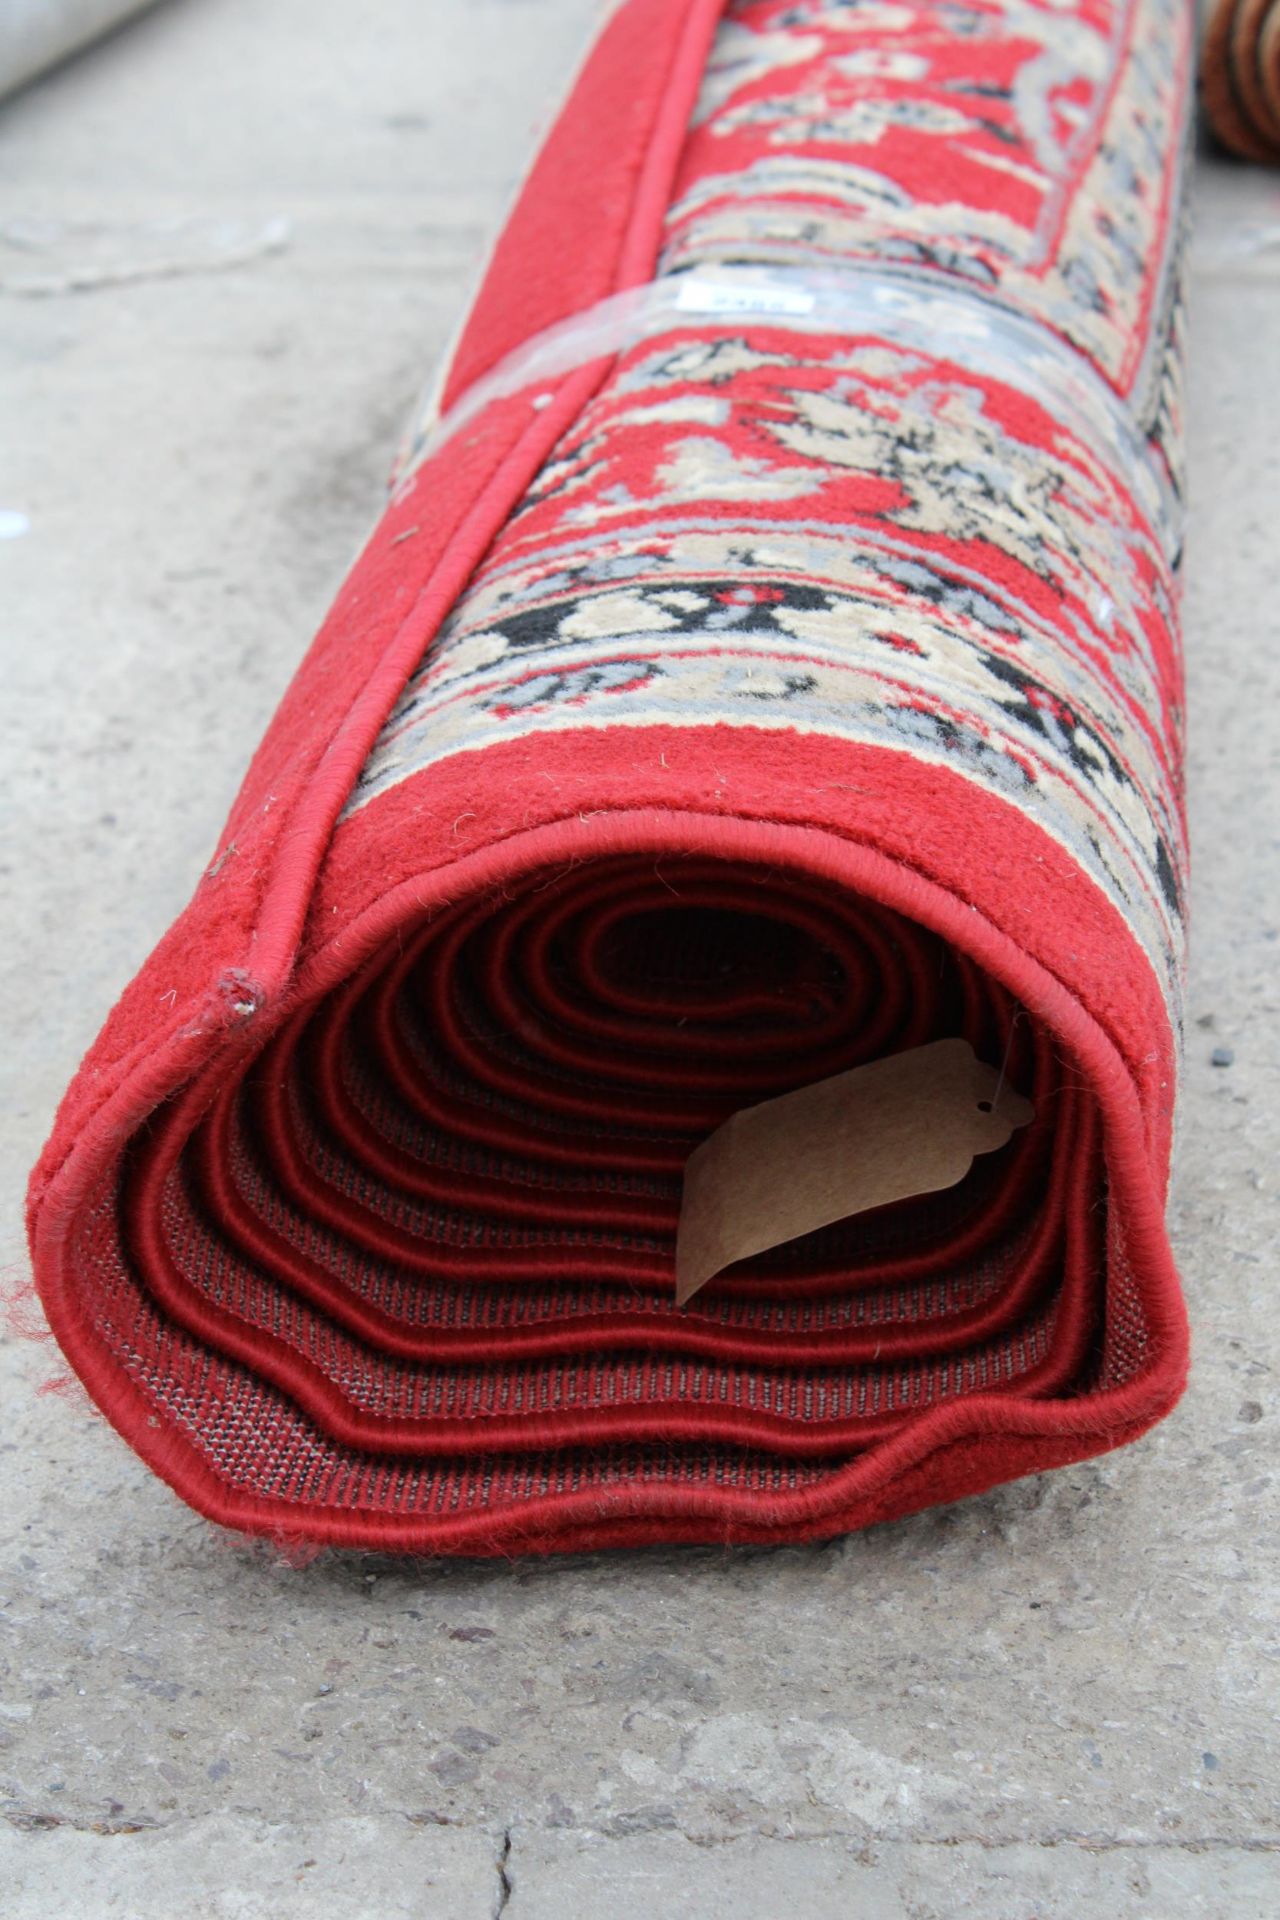 A LARGE RED PATTERNED RUG - Image 3 of 3